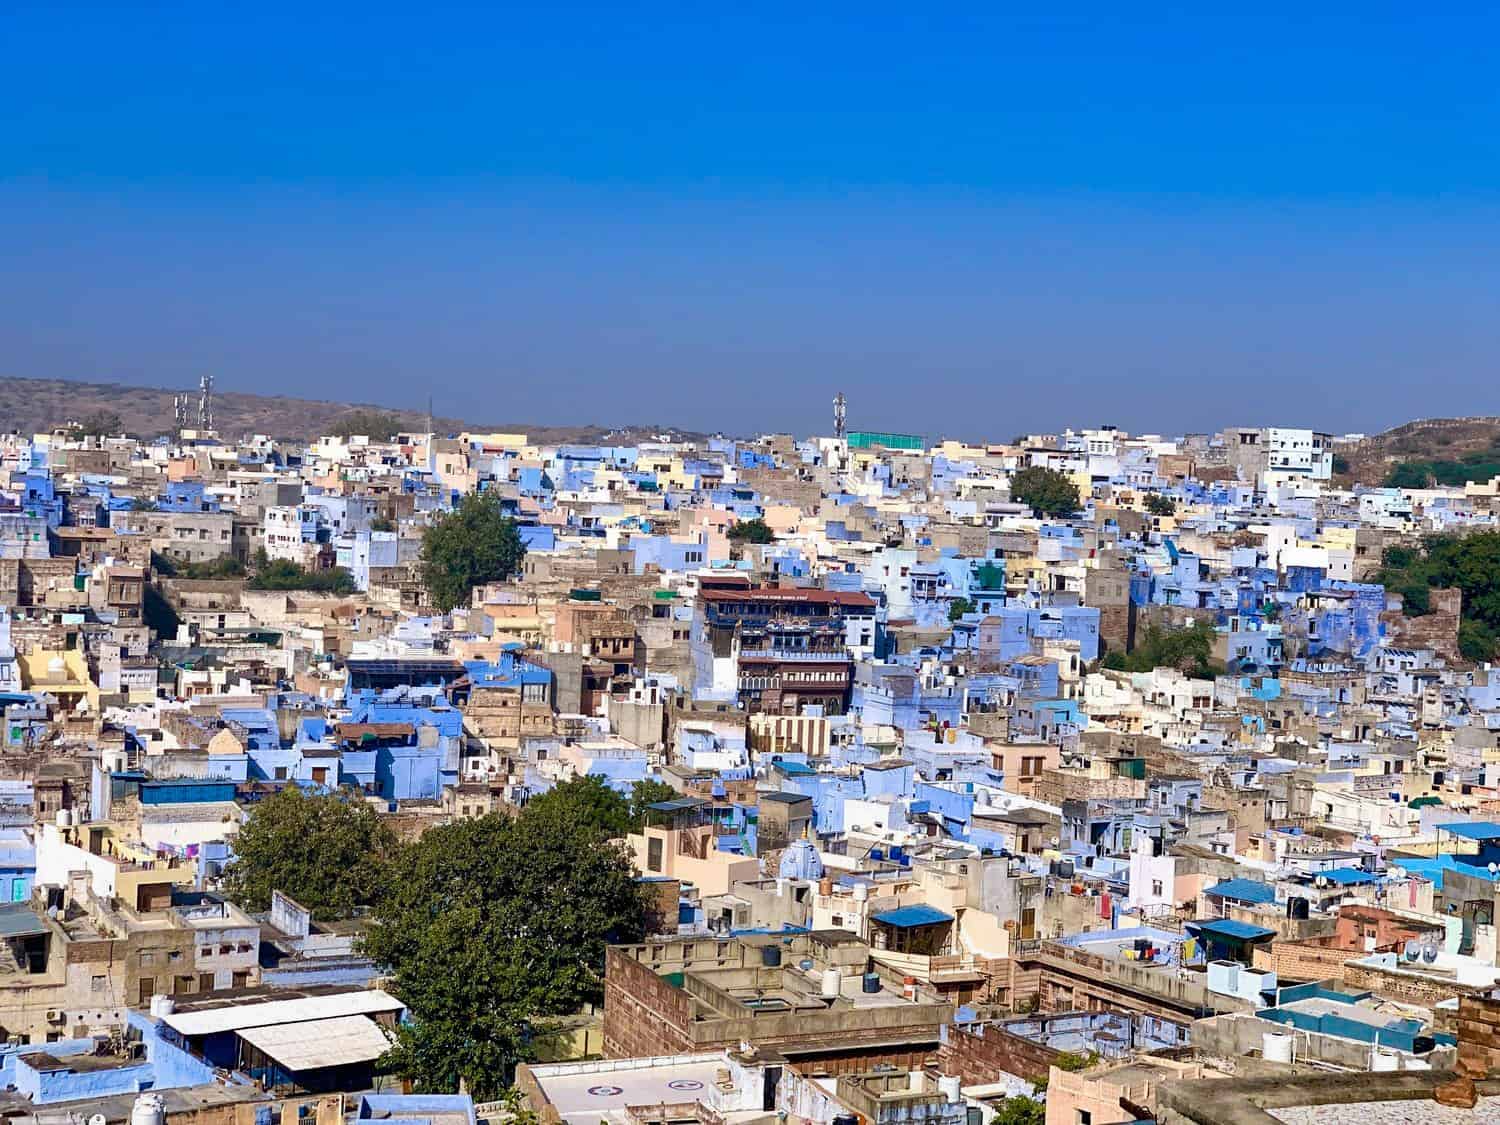 Blue buildings of Jodhpur from above